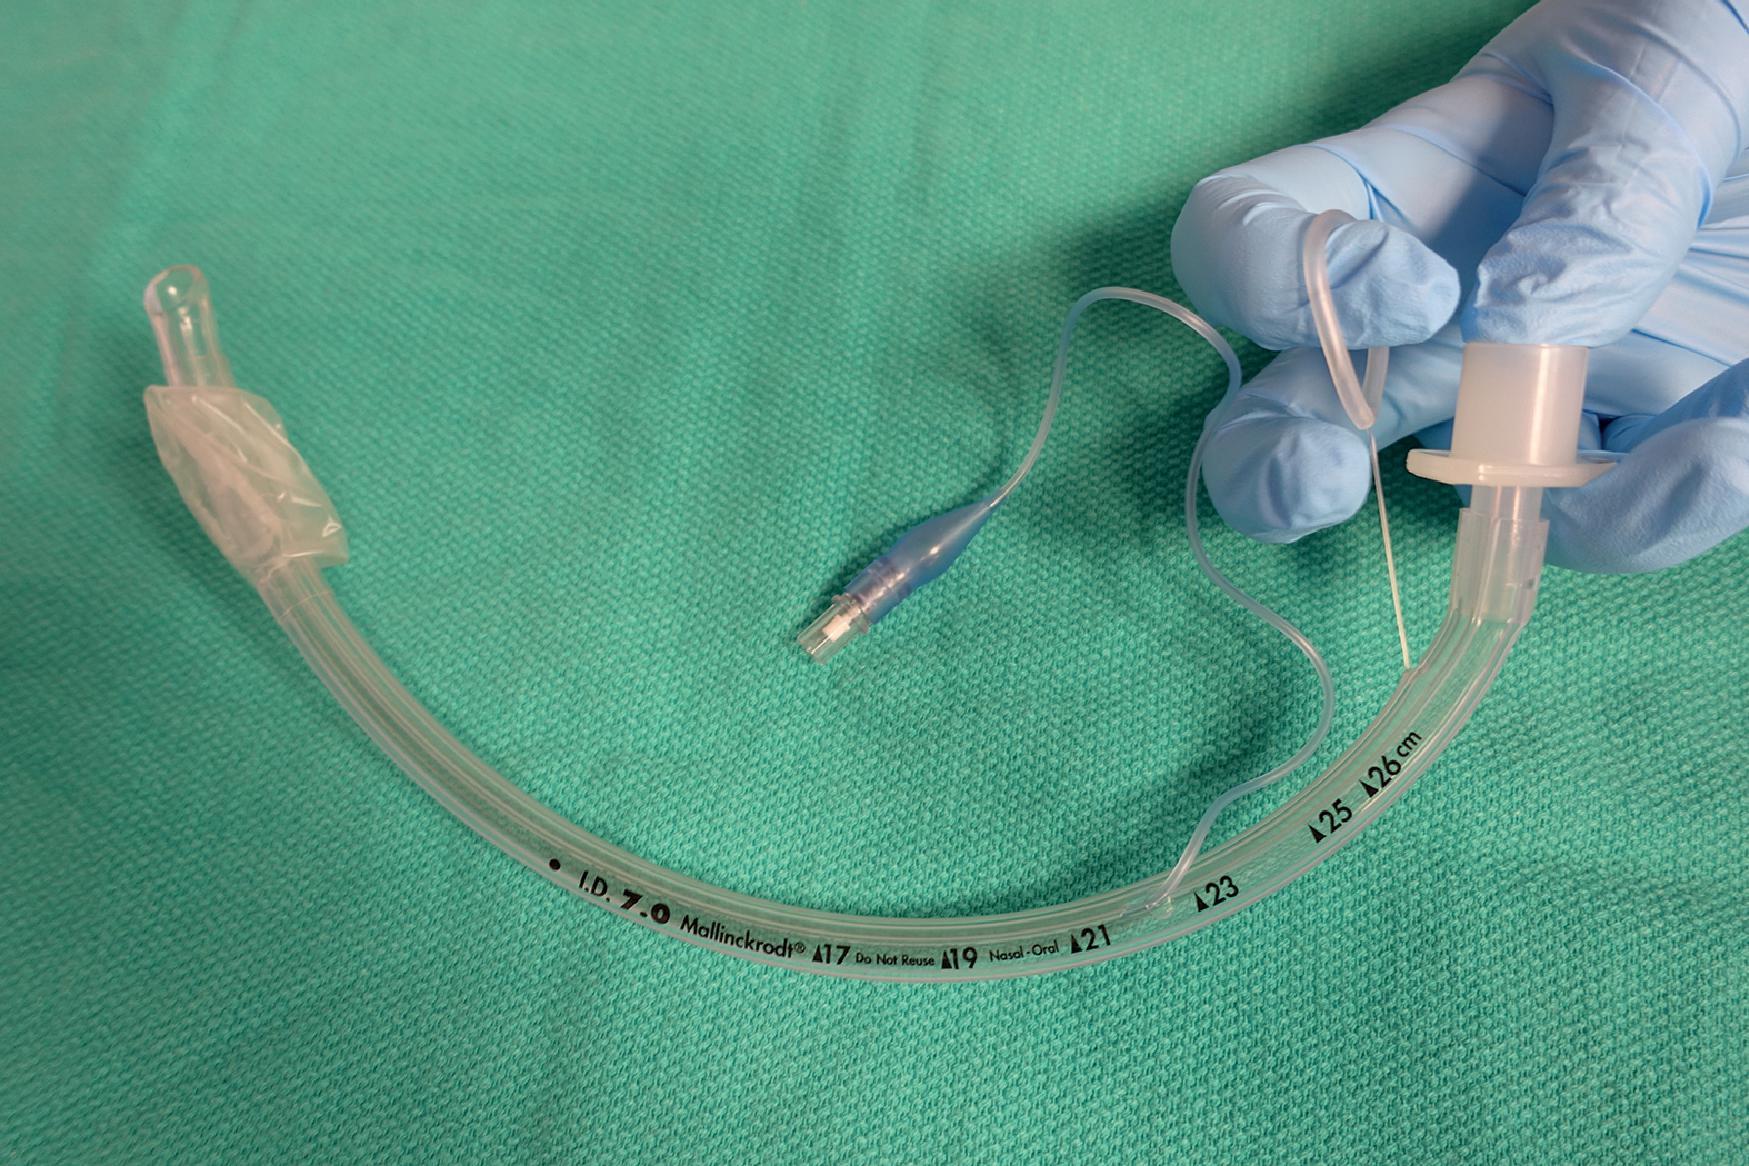 Fig. 21.11, Pulling the ring of the Endotrol Endotracheal Tube exaggerates the natural curvature.